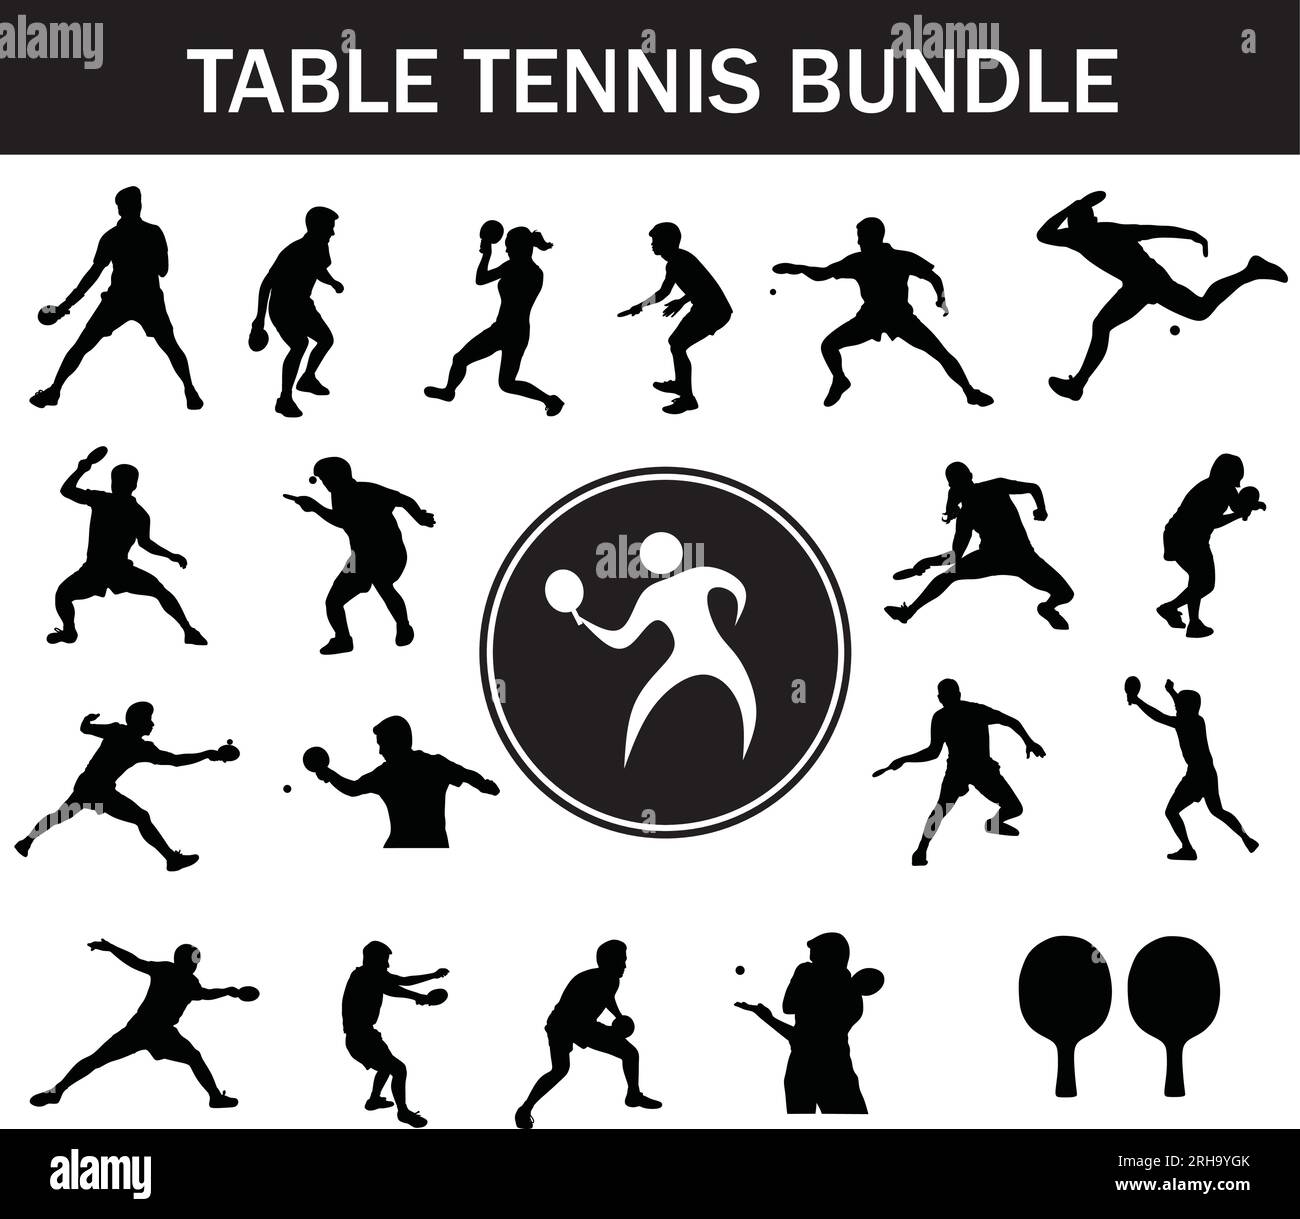 Table Tennis Silhouette Bundle | Collection of Table Tennis Players with Logo and Table Tennis Equipment Stock Vector